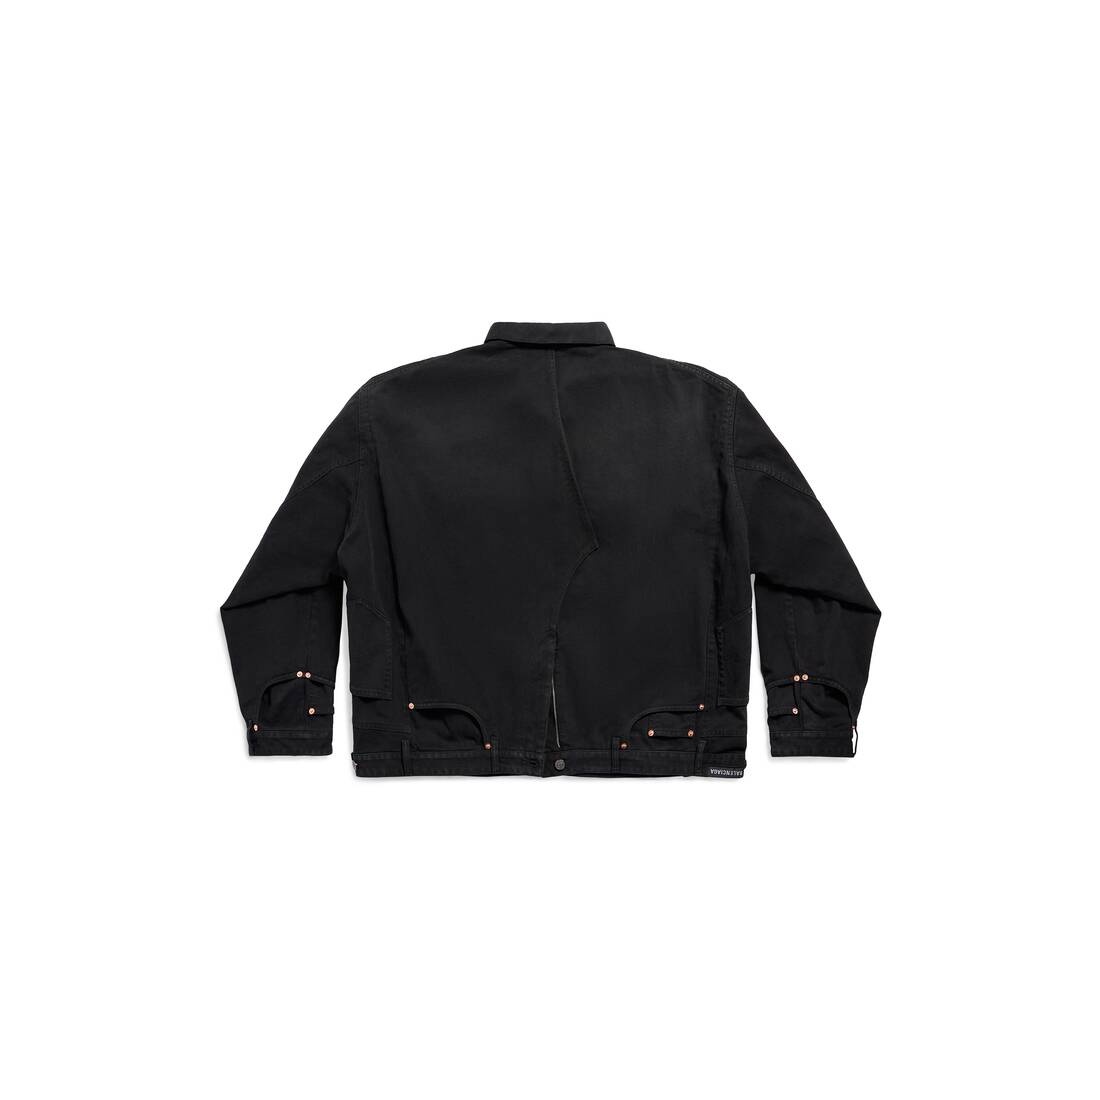 Deconstructed Jacket in Black Faded - 6